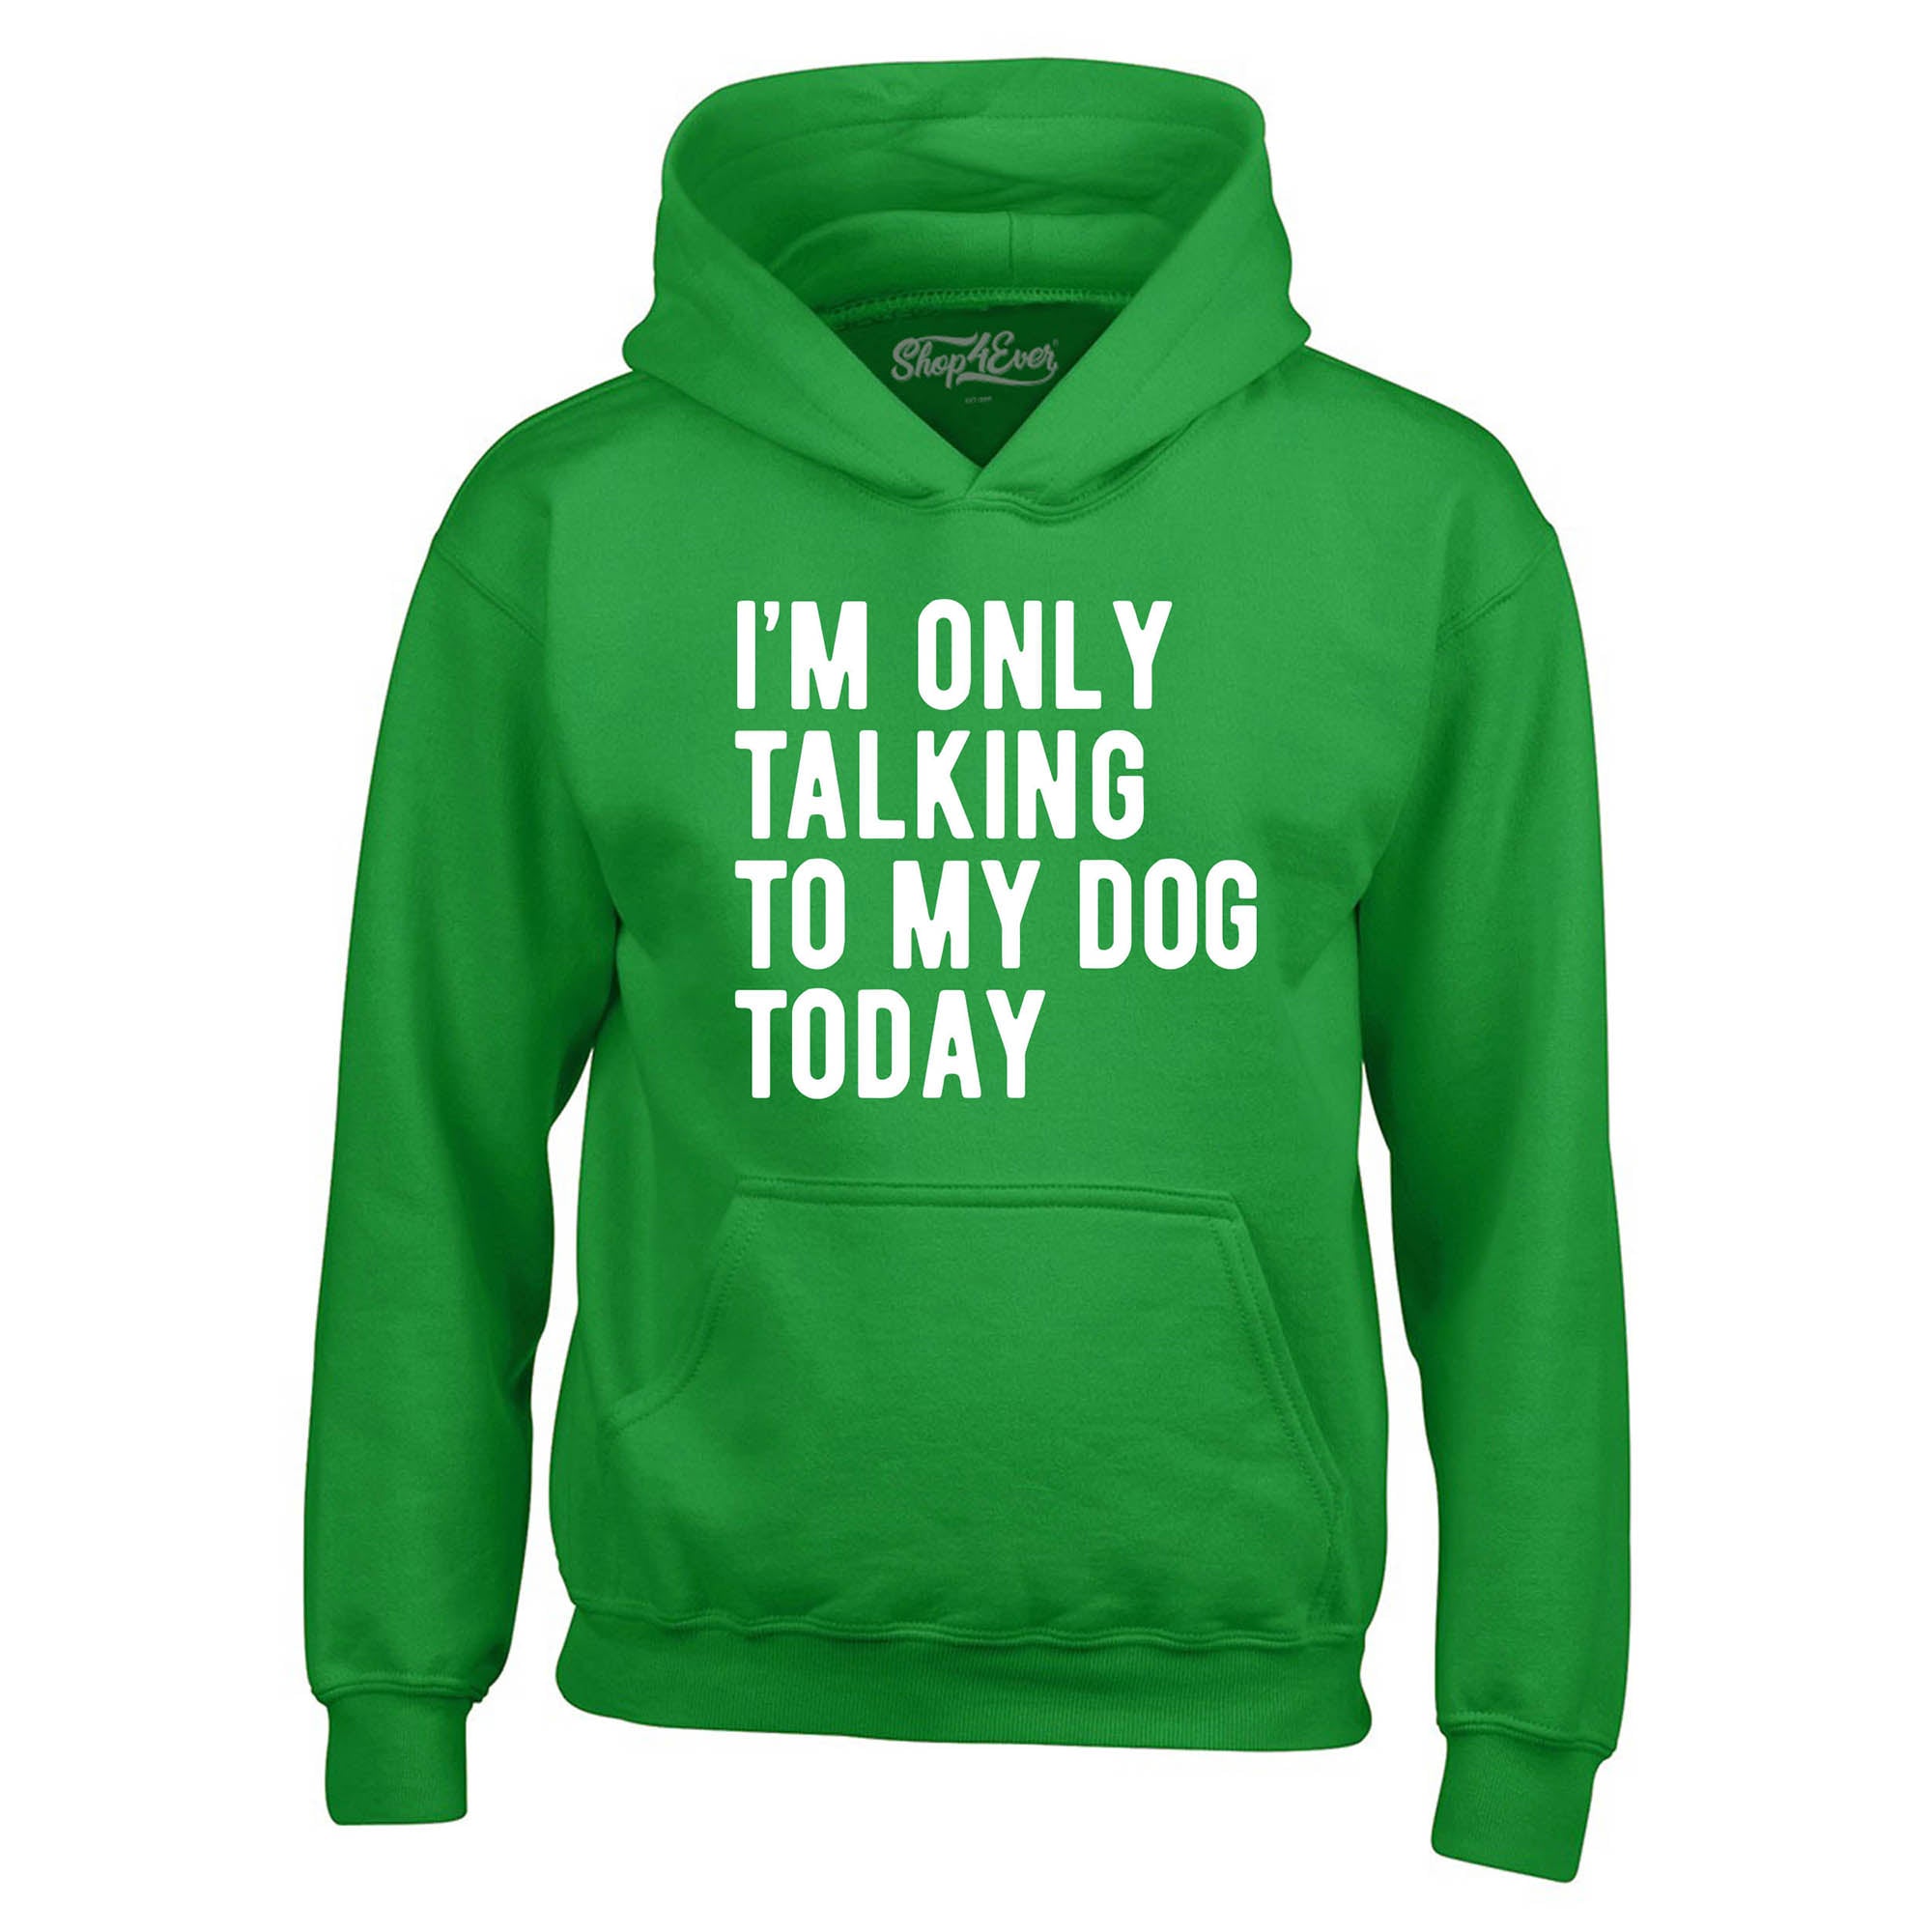 I'm Only Talking to My Dog Today Hoodie Sweatshirts